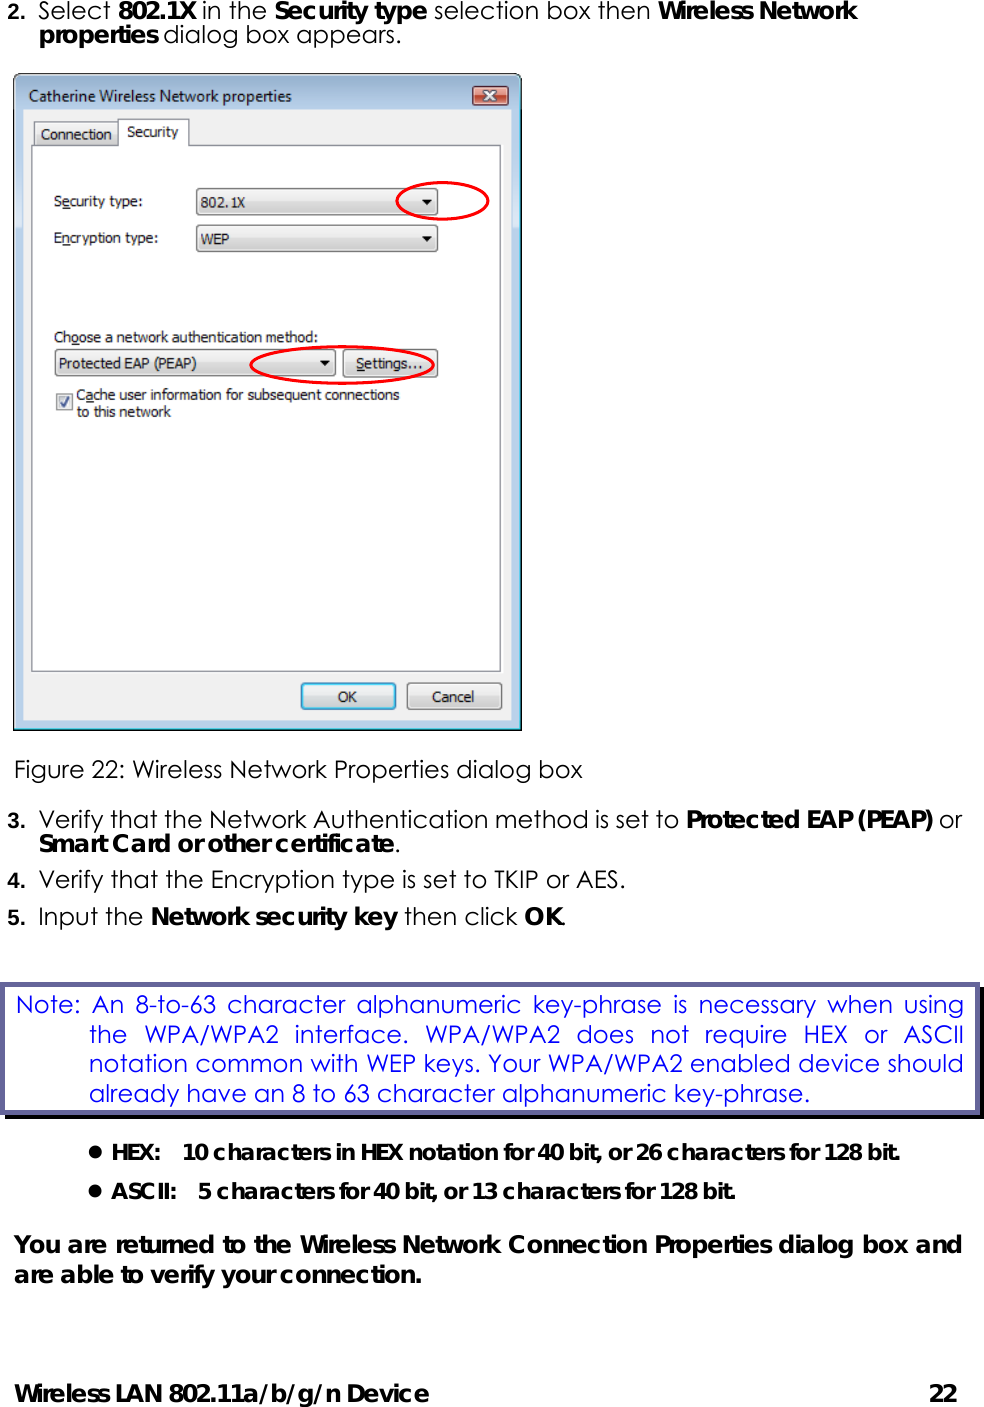 Wireless LAN 802.11a/b/g/n Device                                         22 2.  Select 802.1X in the Security type selection box then Wireless Network properties dialog box appears.    Figure 22: Wireless Network Properties dialog box 3.  Verify that the Network Authentication method is set to Protected EAP (PEAP) or Smart Card or other certificate. 4.  Verify that the Encryption type is set to TKIP or AES. 5.  Input the Network security key then click OK. z HEX:    10 characters in HEX notation for 40 bit, or 26 characters for 128 bit. z ASCII:    5 characters for 40 bit, or 13 characters for 128 bit. You are returned to the Wireless Network Connection Properties dialog box and are able to verify your connection.  Note: An 8-to-63 character alphanumeric key-phrase is necessary when using the WPA/WPA2 interface. WPA/WPA2 does not require HEX or ASCII notation common with WEP keys. Your WPA/WPA2 enabled device should already have an 8 to 63 character alphanumeric key-phrase.   